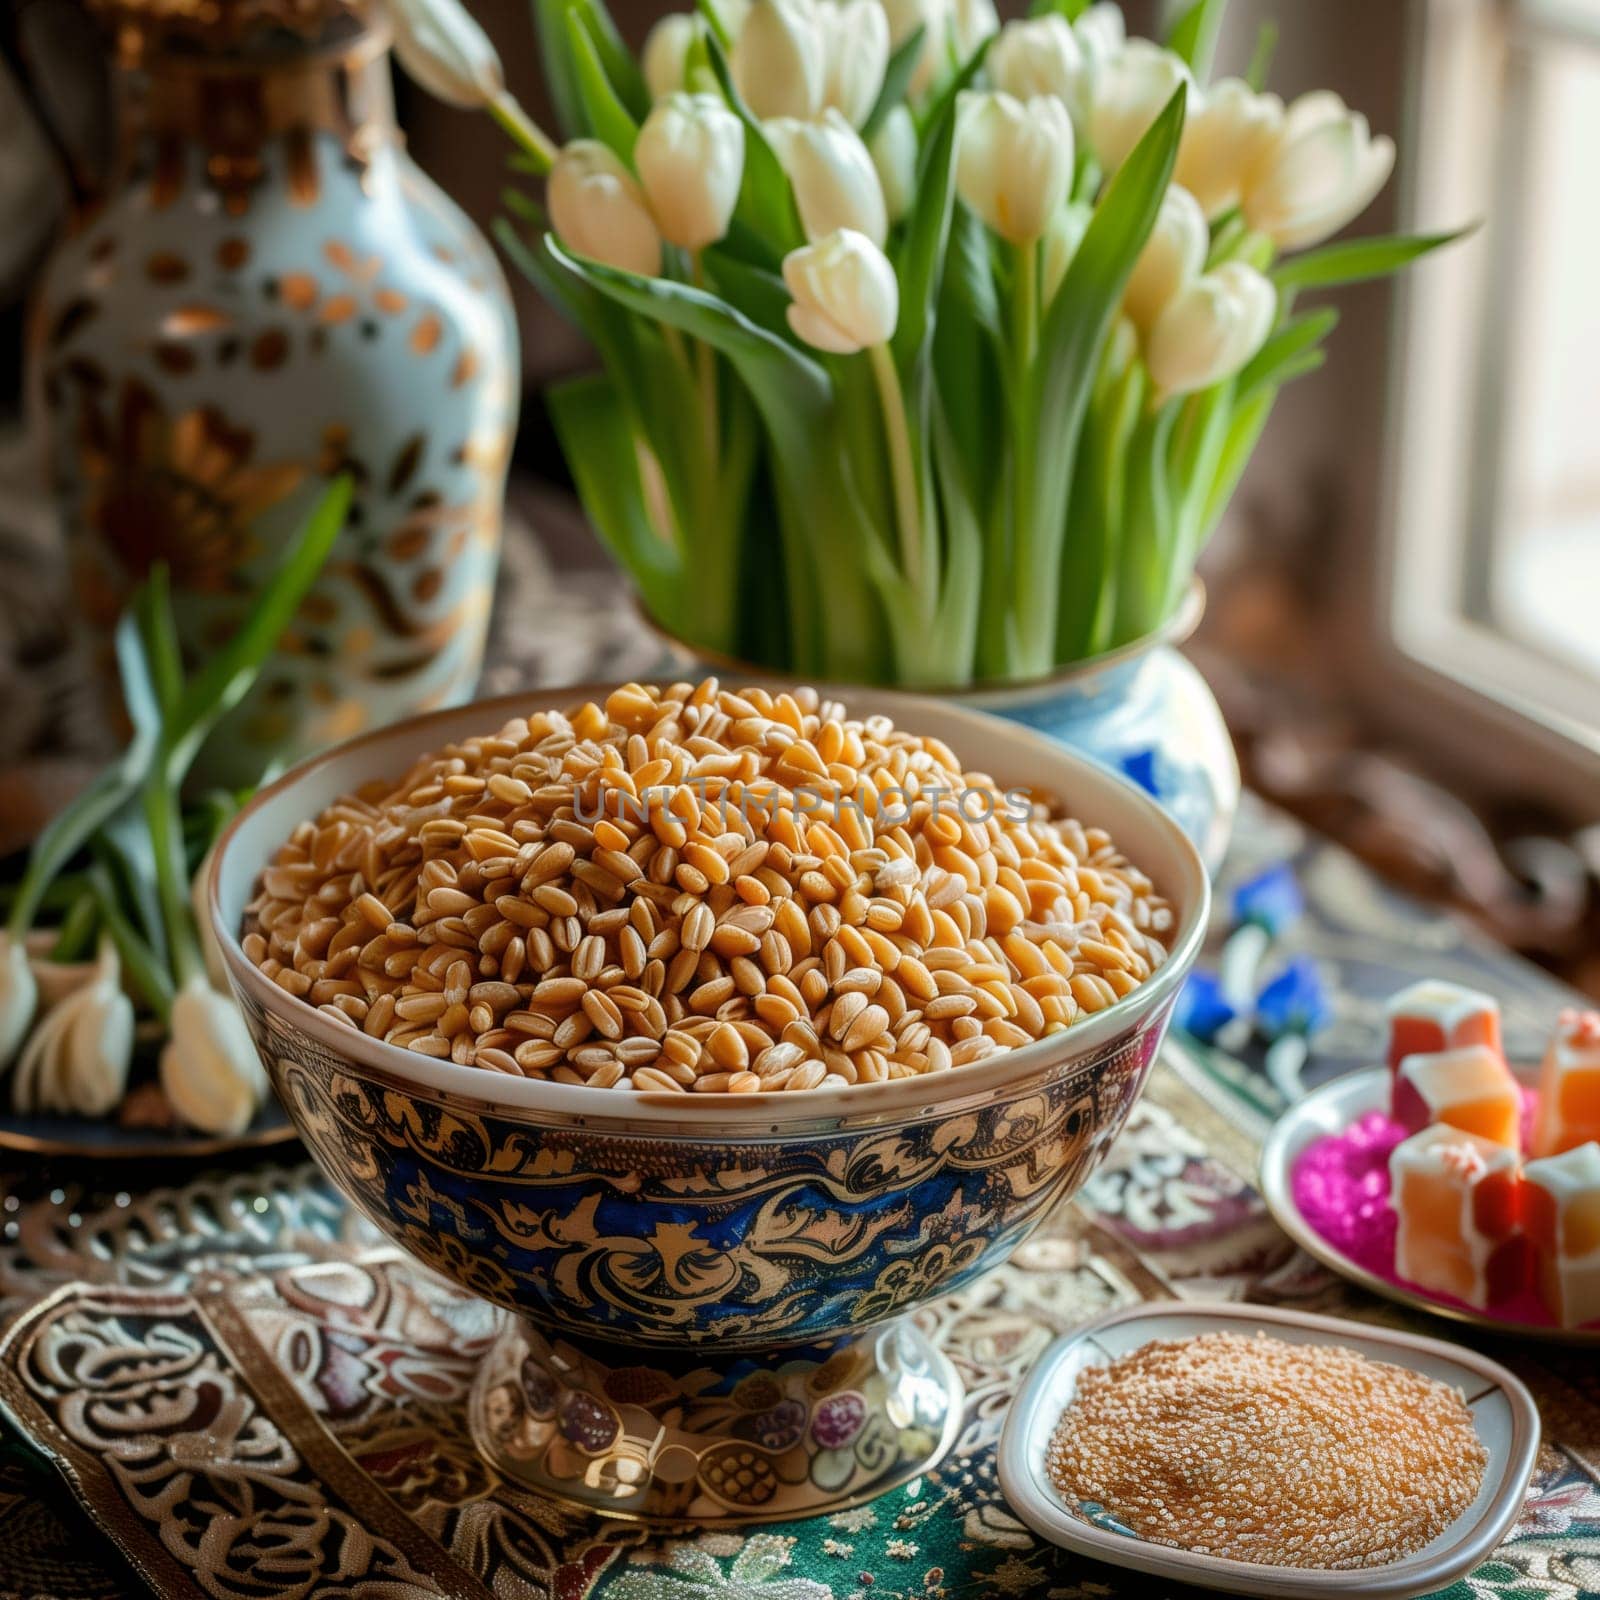 Wheat in a traditional dish stands on a table with sweets and flowers by the window in the kitchen early in the morning, close-up side view.